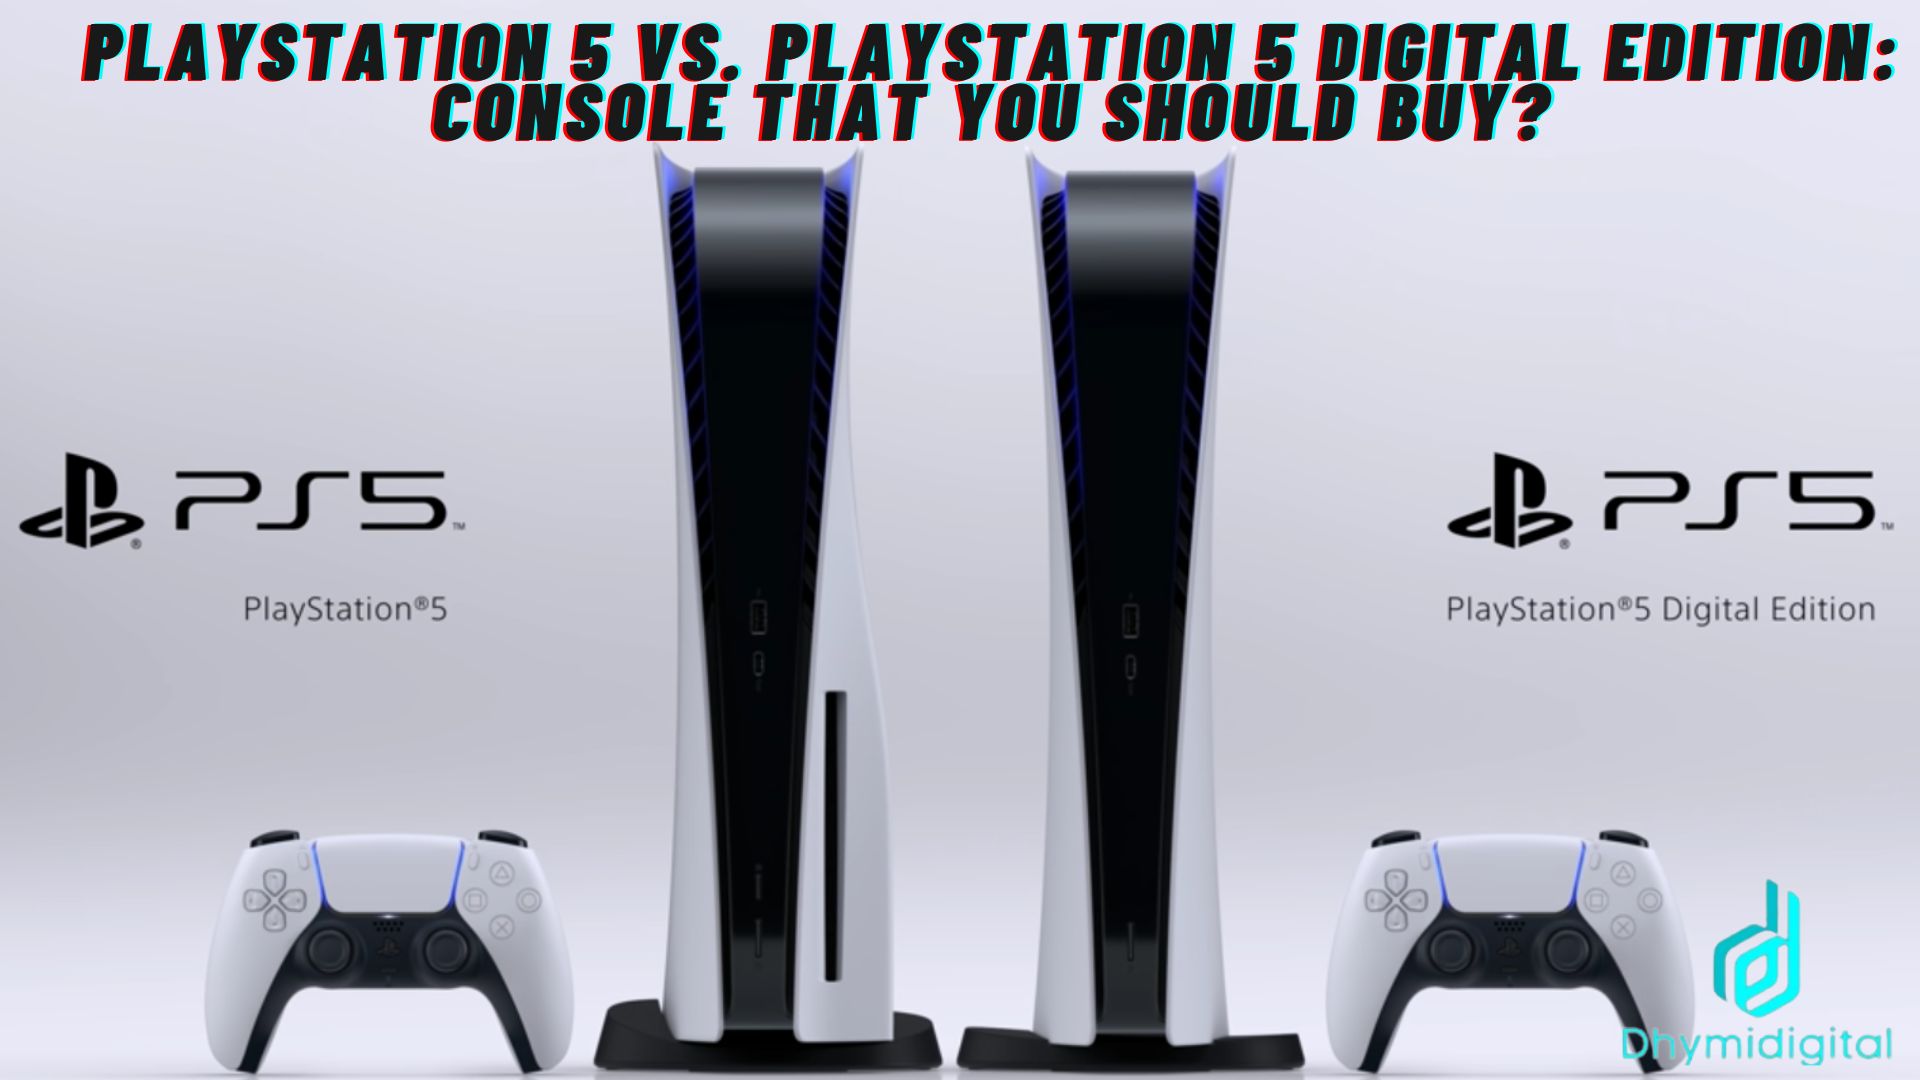 PlayStation 5 vs. PlayStation 5 Digital Edition: Console that you should buy?